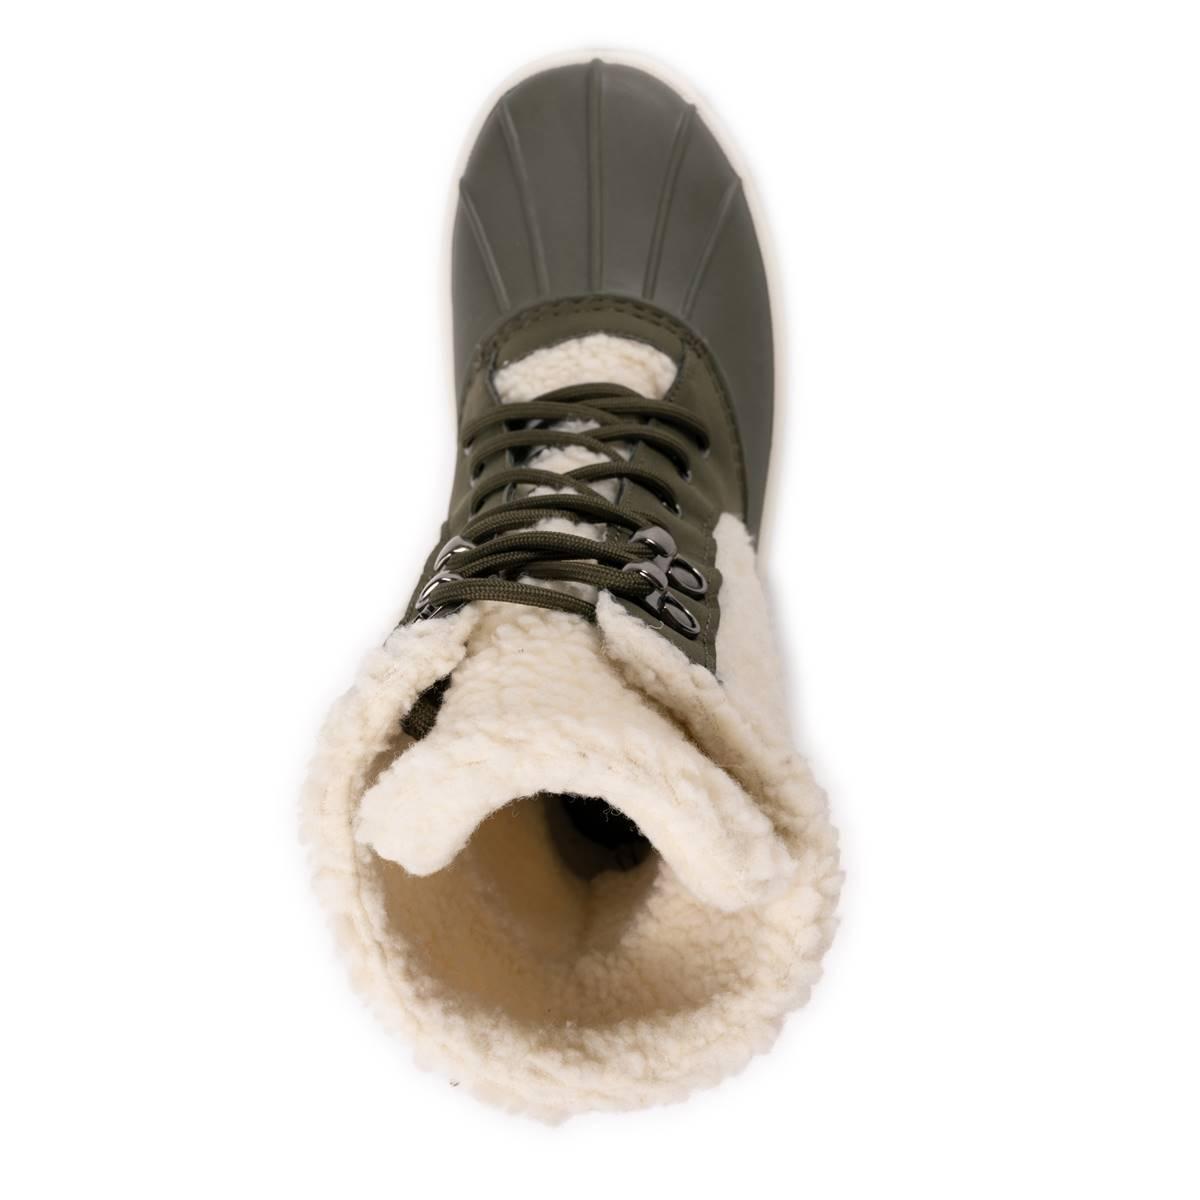 Womens MUK LUKS(R) Kinsley Kendall Winter Boots Product Image